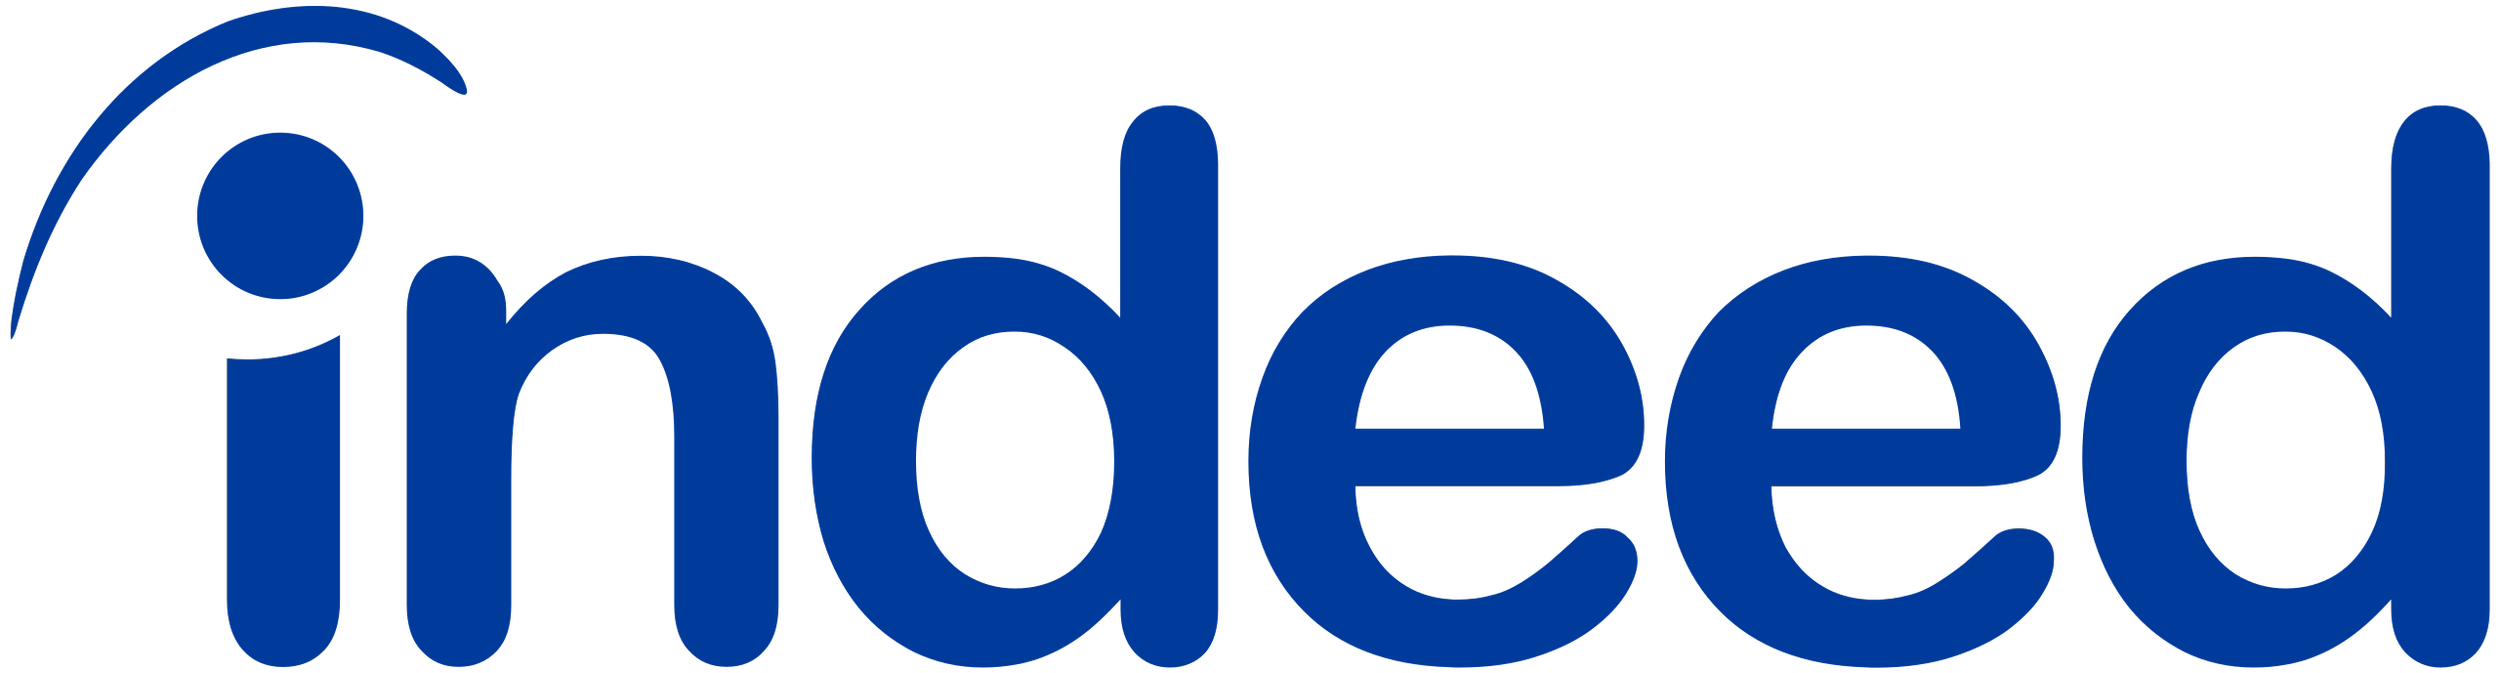 Indeed_logo.png